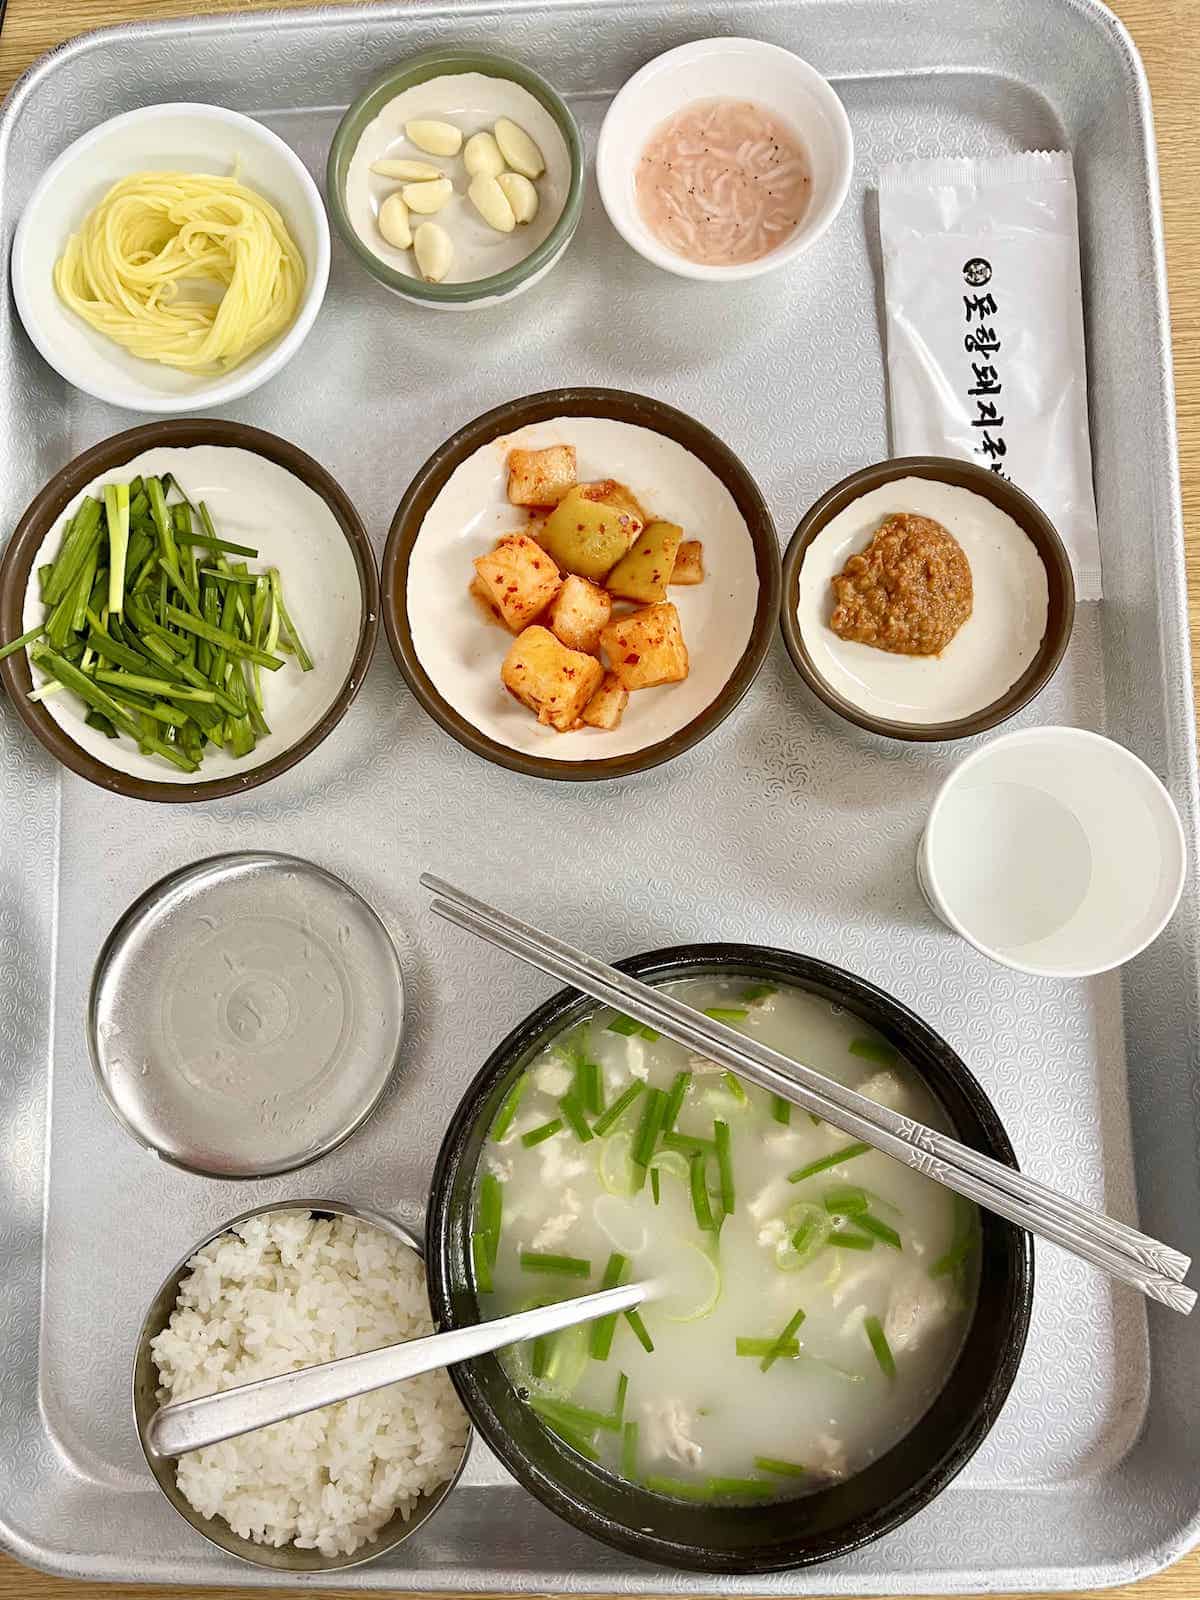 A bowl of Korean pork soup, rice and side dishes.